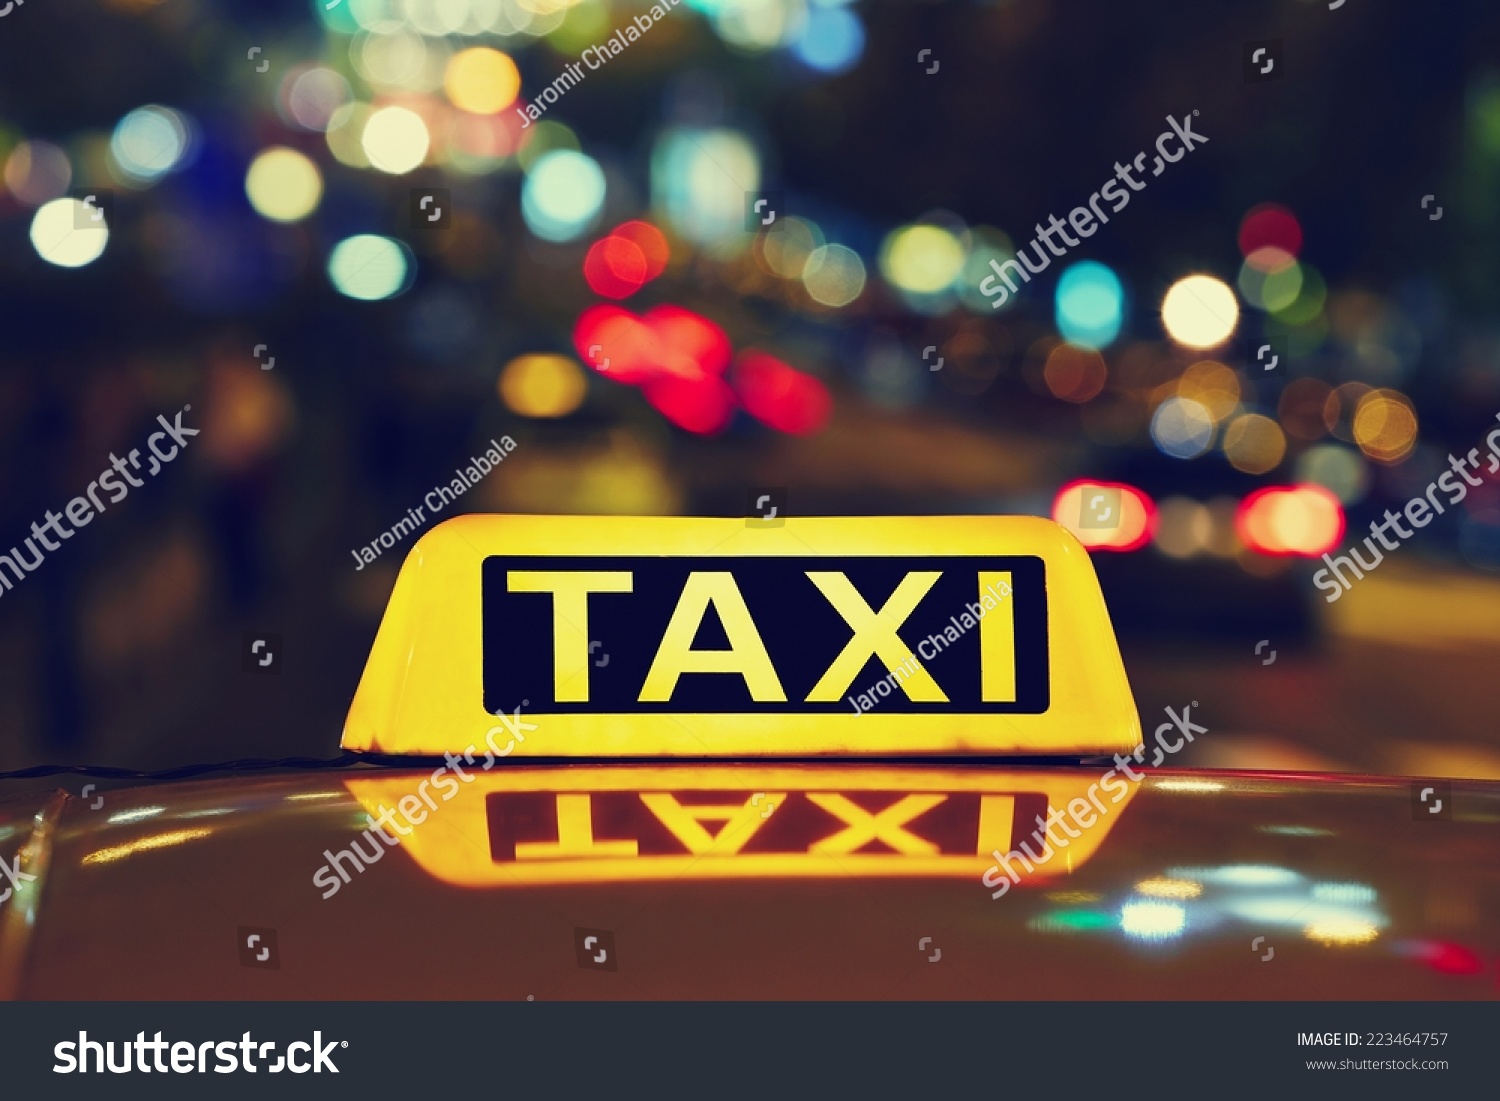 Taxi car on the street at night  #223464757